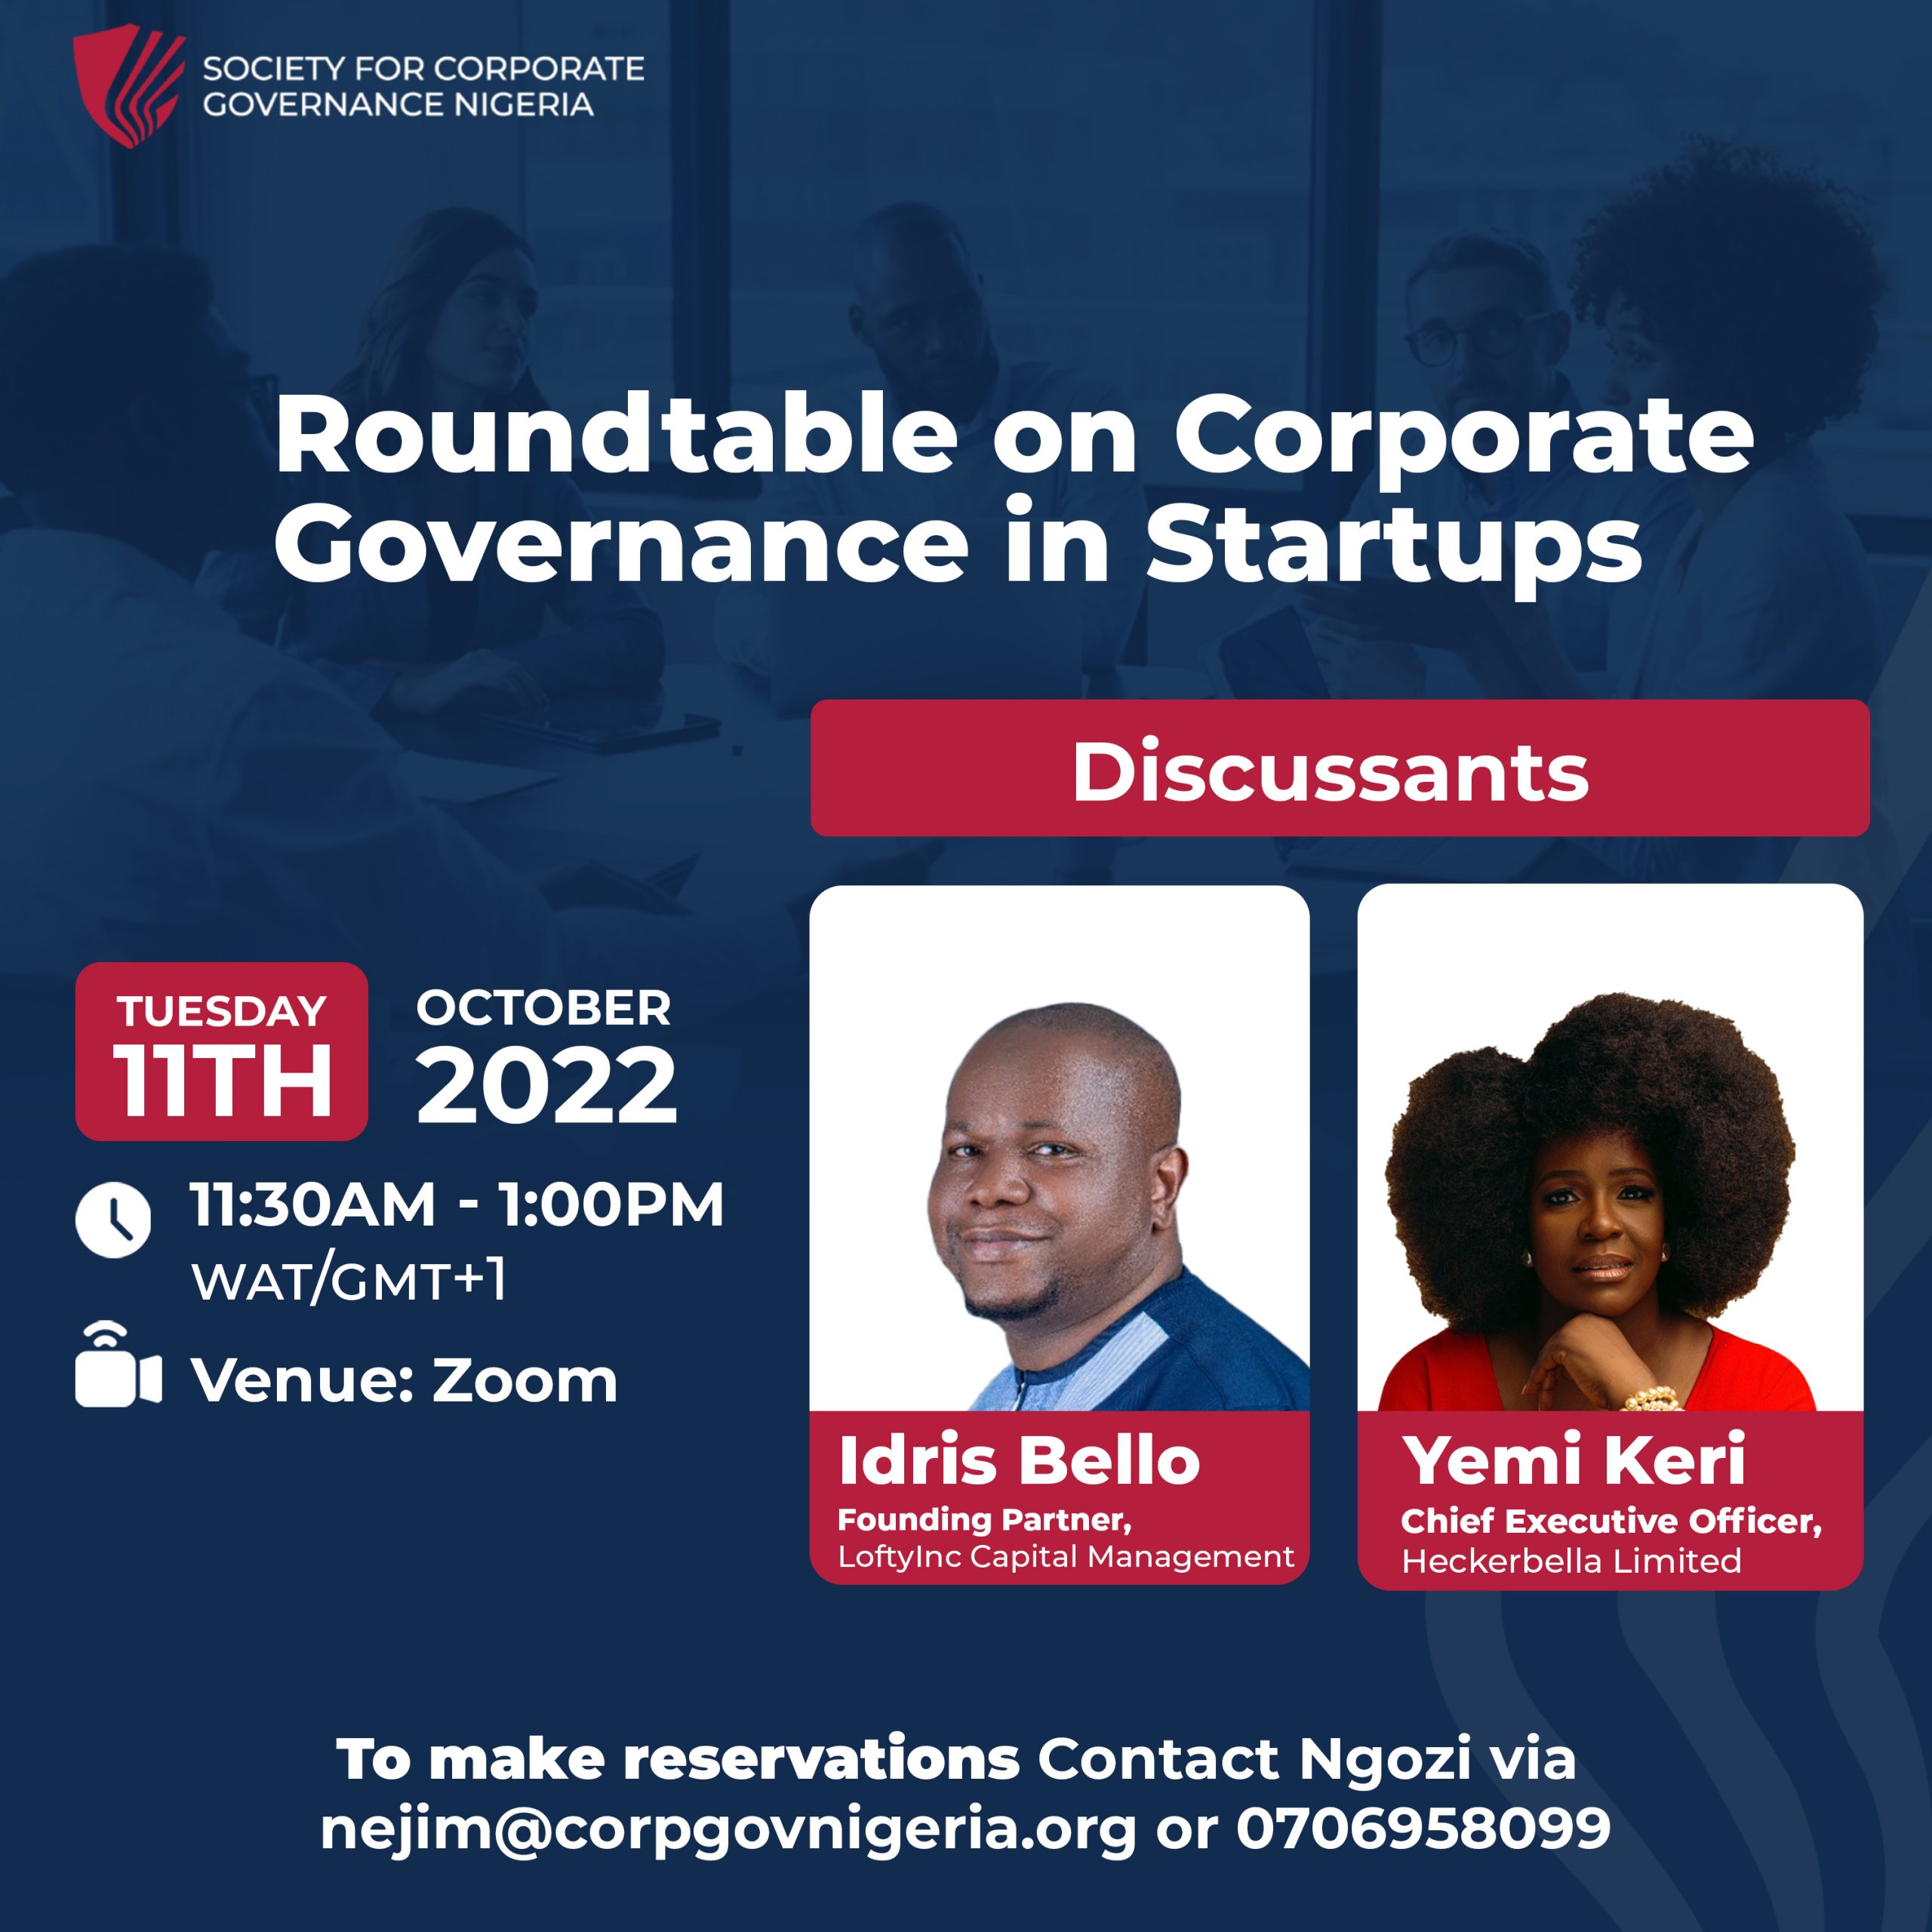 Roundtable on Corporate Governance in Startups